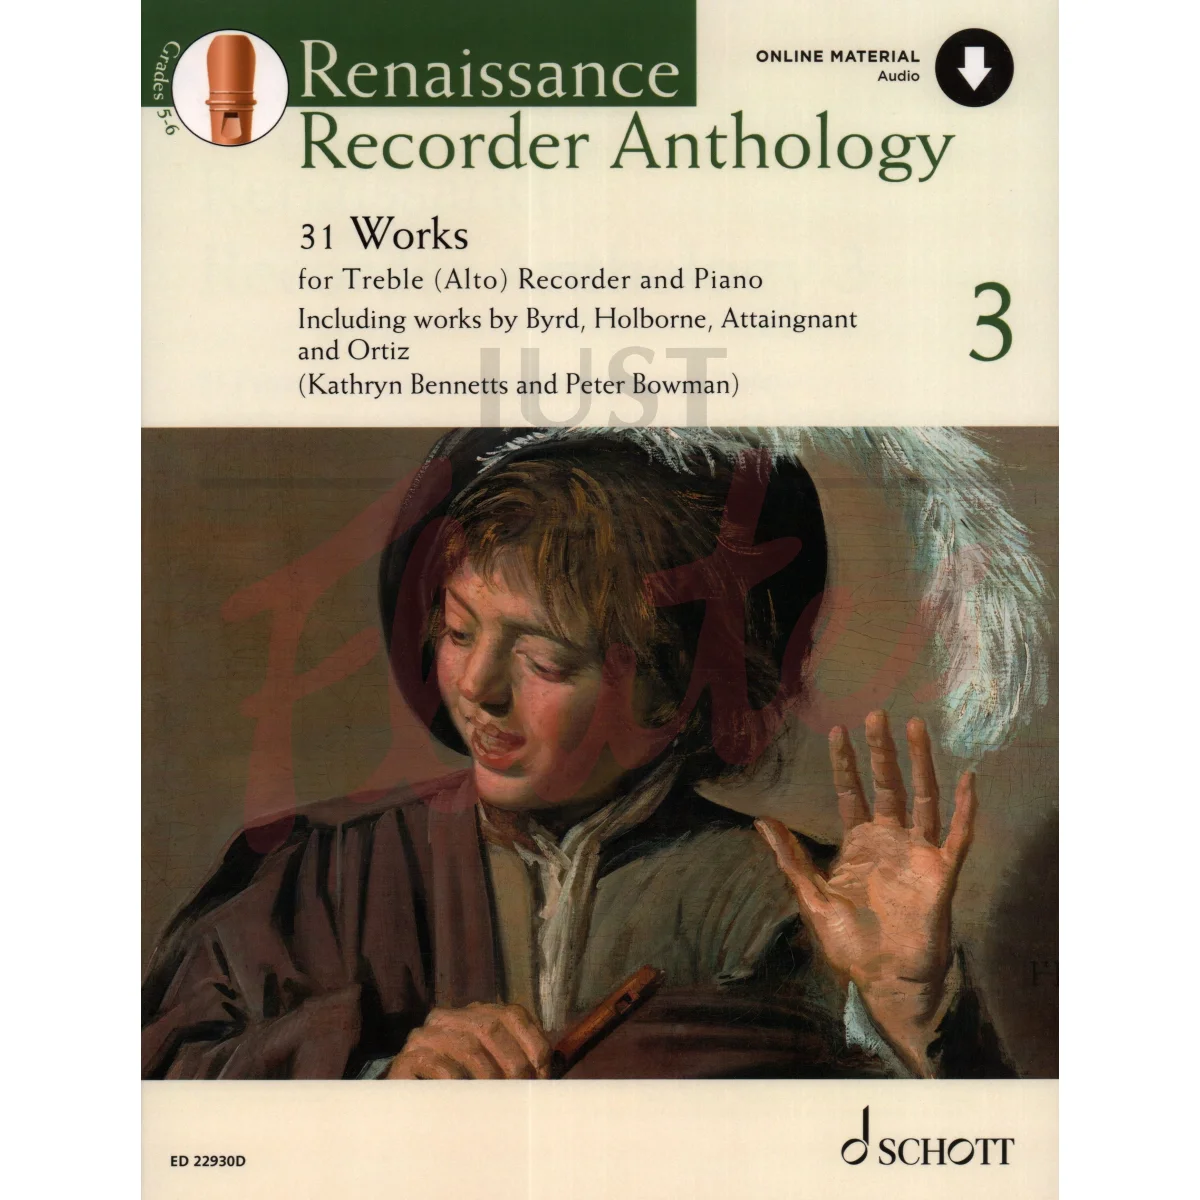 Renaissance Recorder Anthology for Treble Recorder and Piano